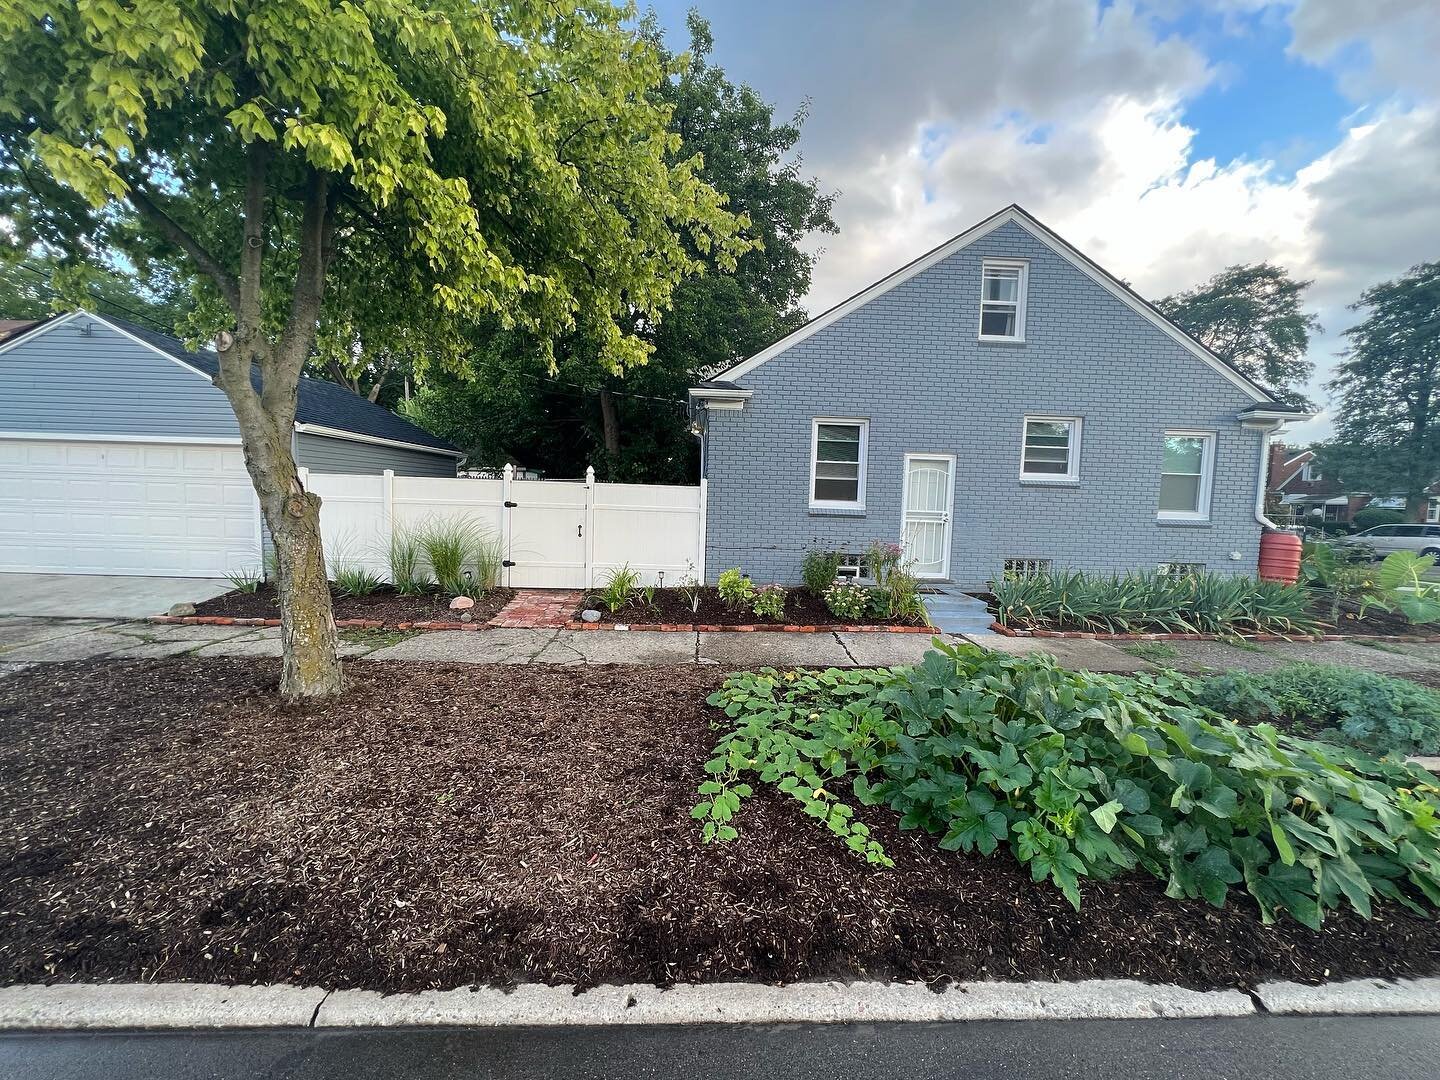 The space on the side of this house was totally dead, underutilized, and difficult to mow. We transformed it into a garden that encompasses native plants, pollinator friendly flowers, and vegetables. Amazing to see the profound impact a small garden 